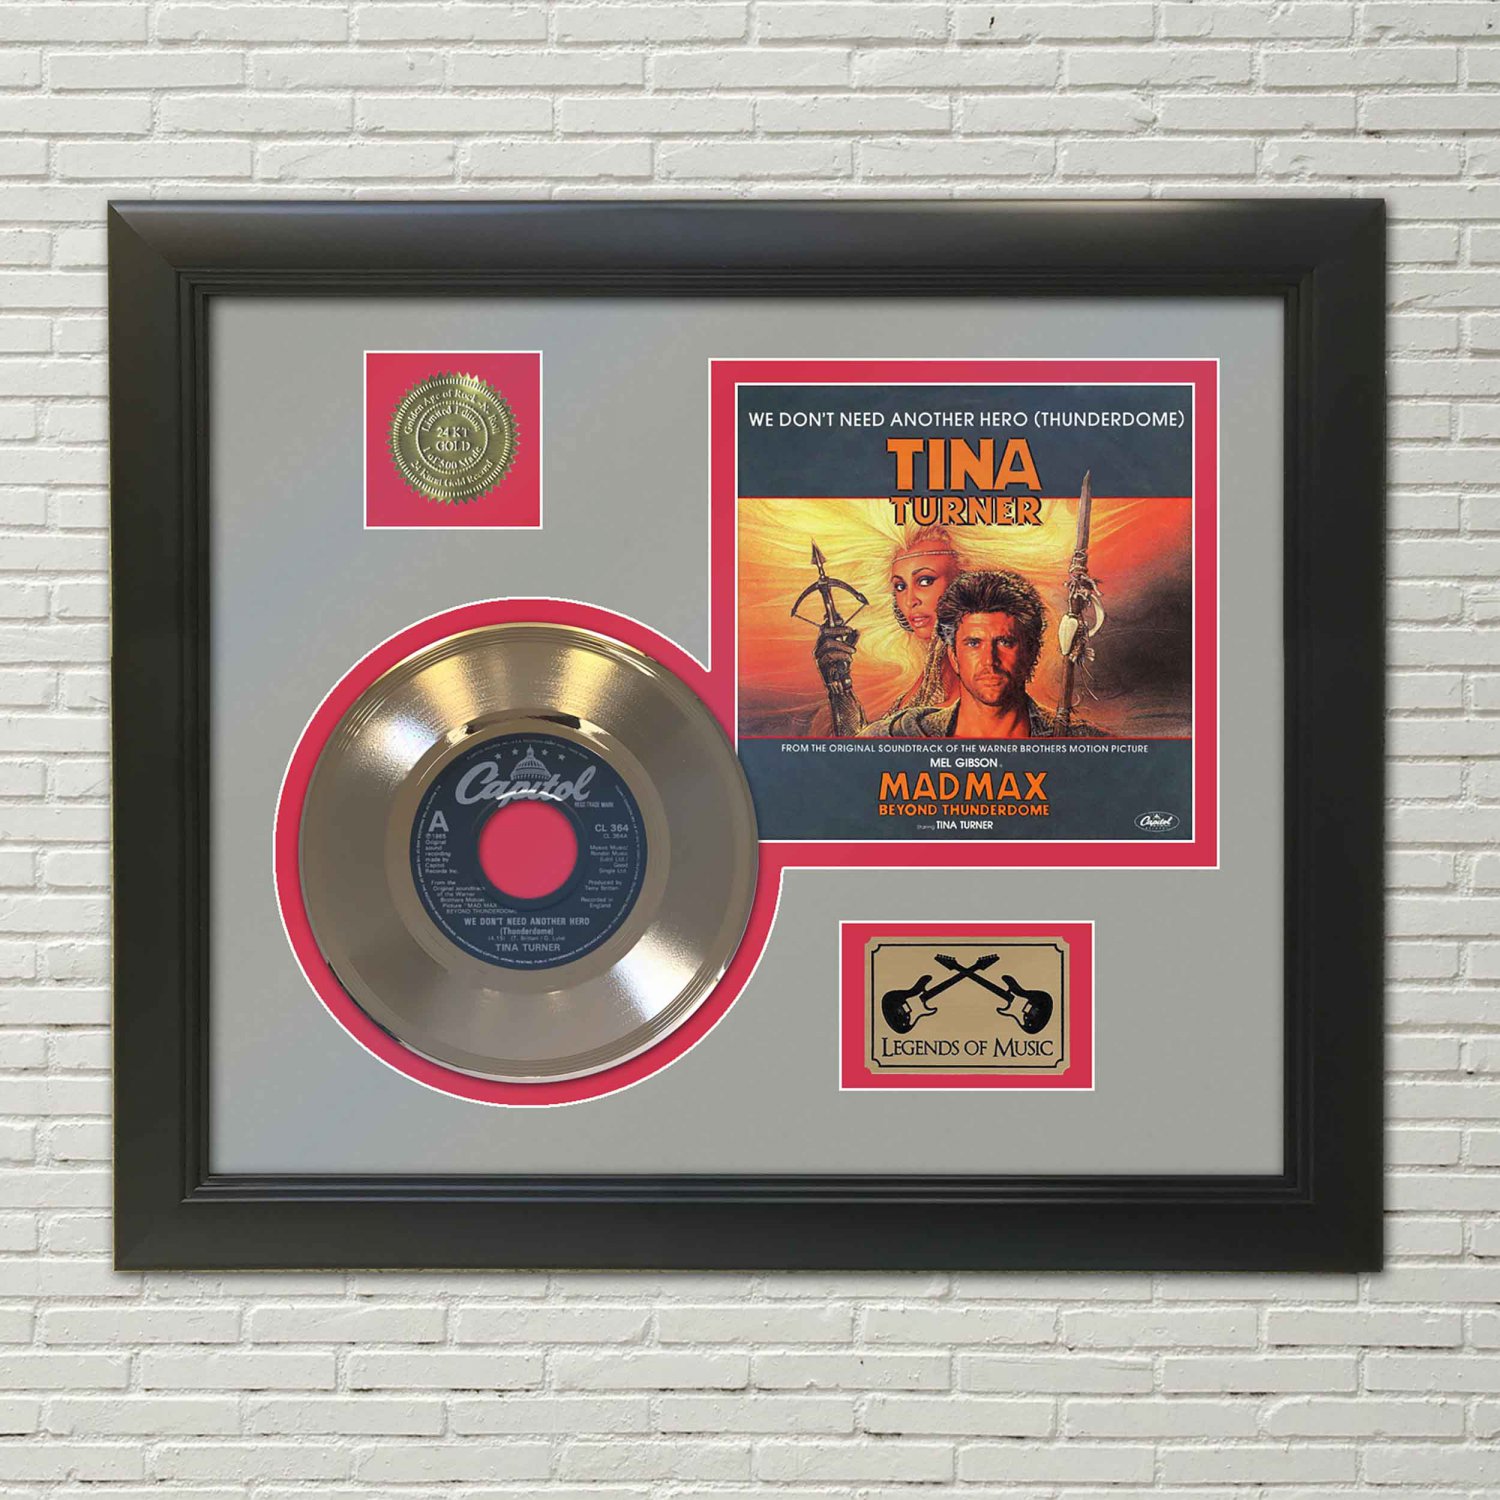 TINA TURNER "We Donâ��t Need Another Hero"  Framed Picture Sleeve Gold 45 Record Display